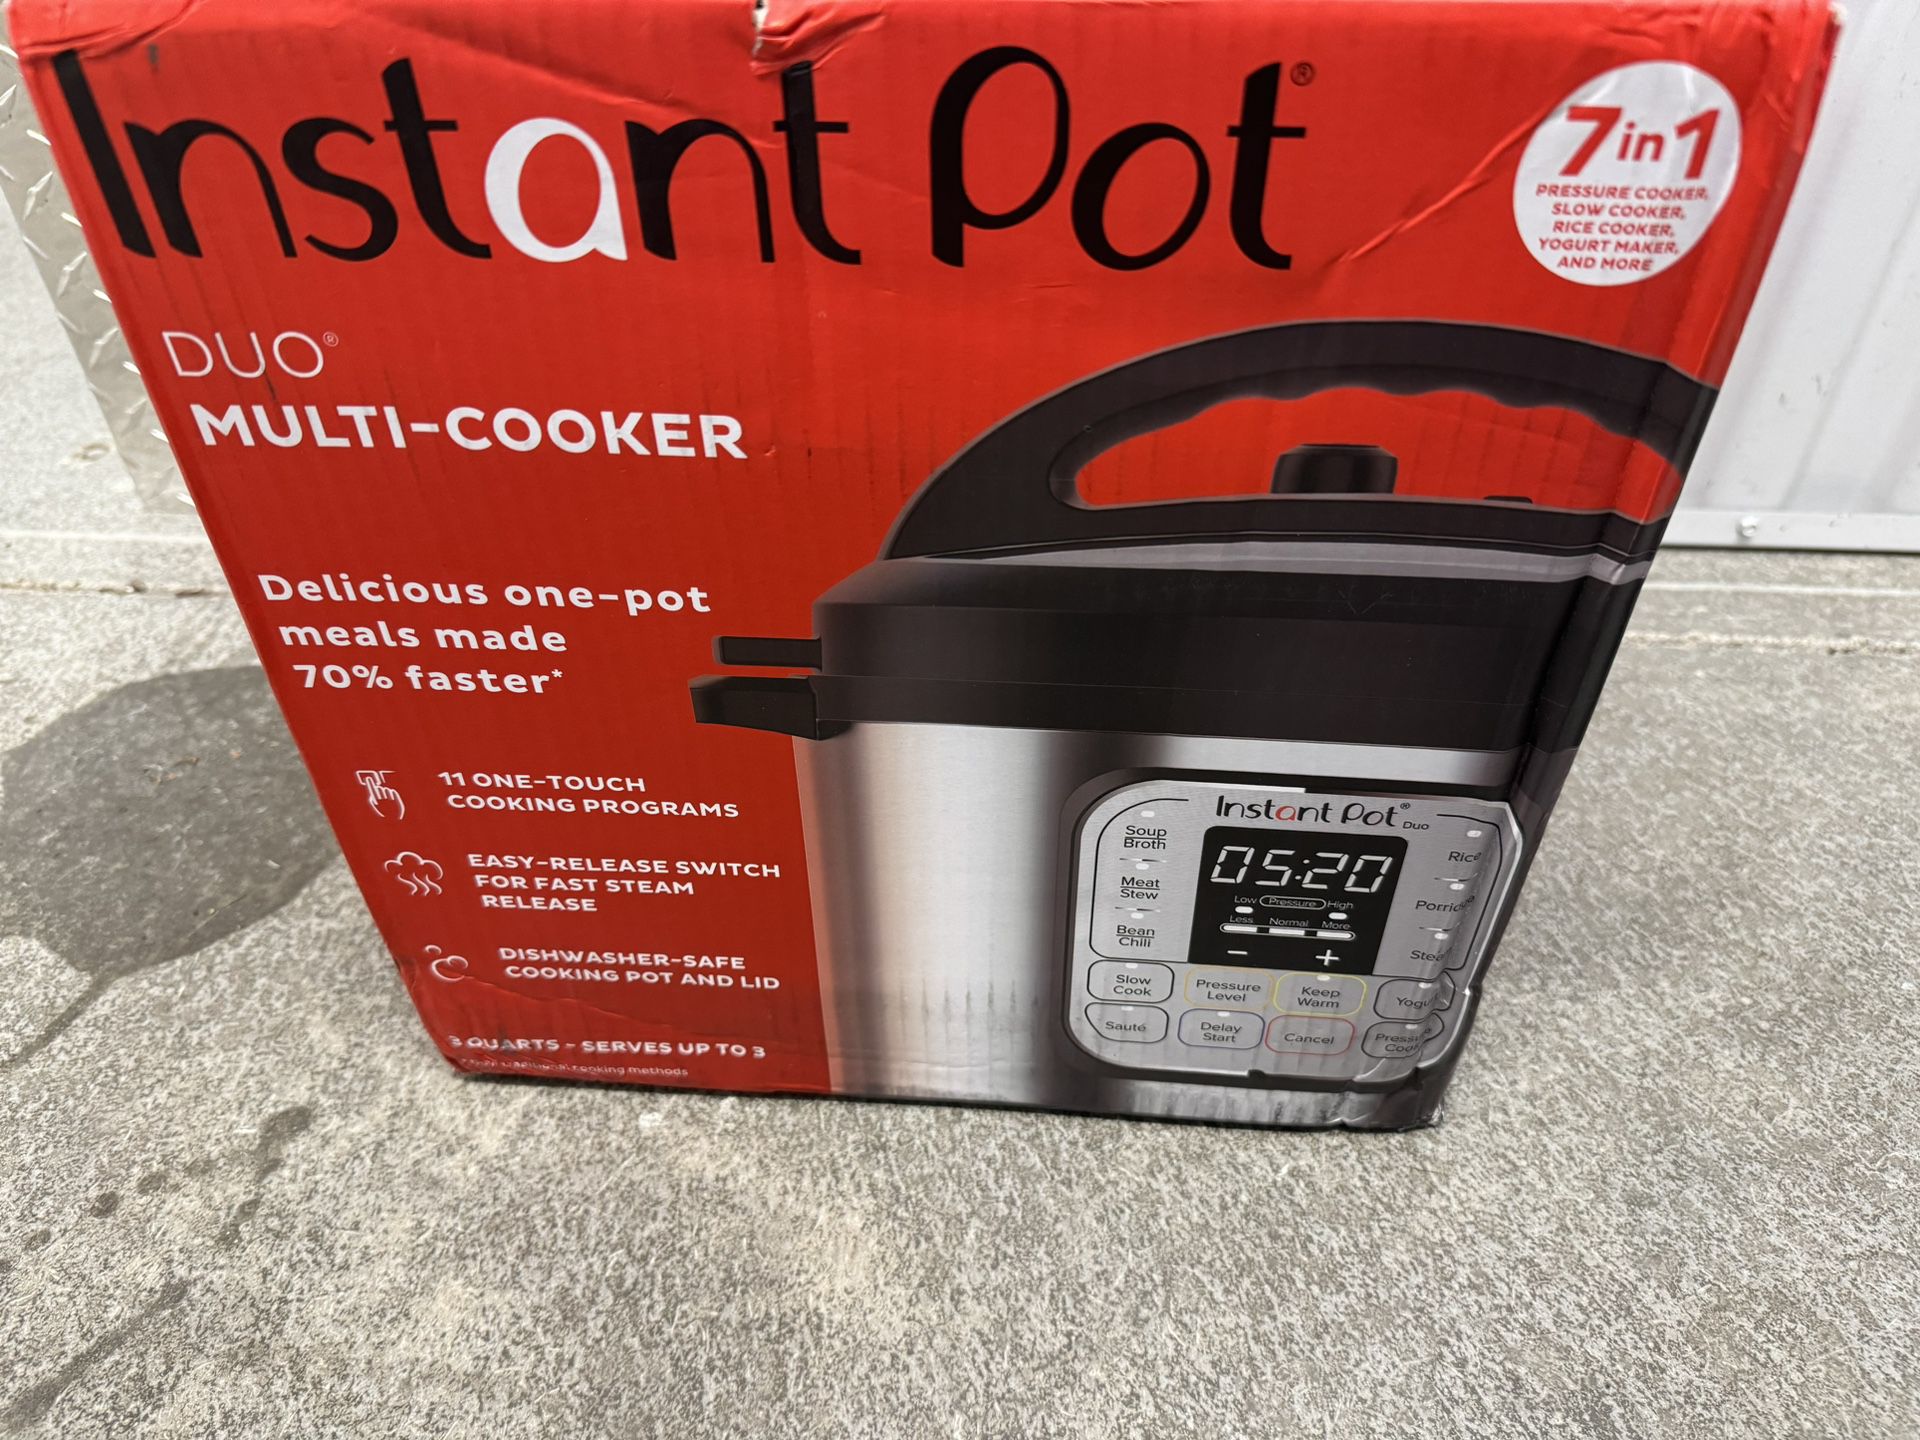 Brand New Instantpot 7In 1 Mini Electric Cooker 3QTS